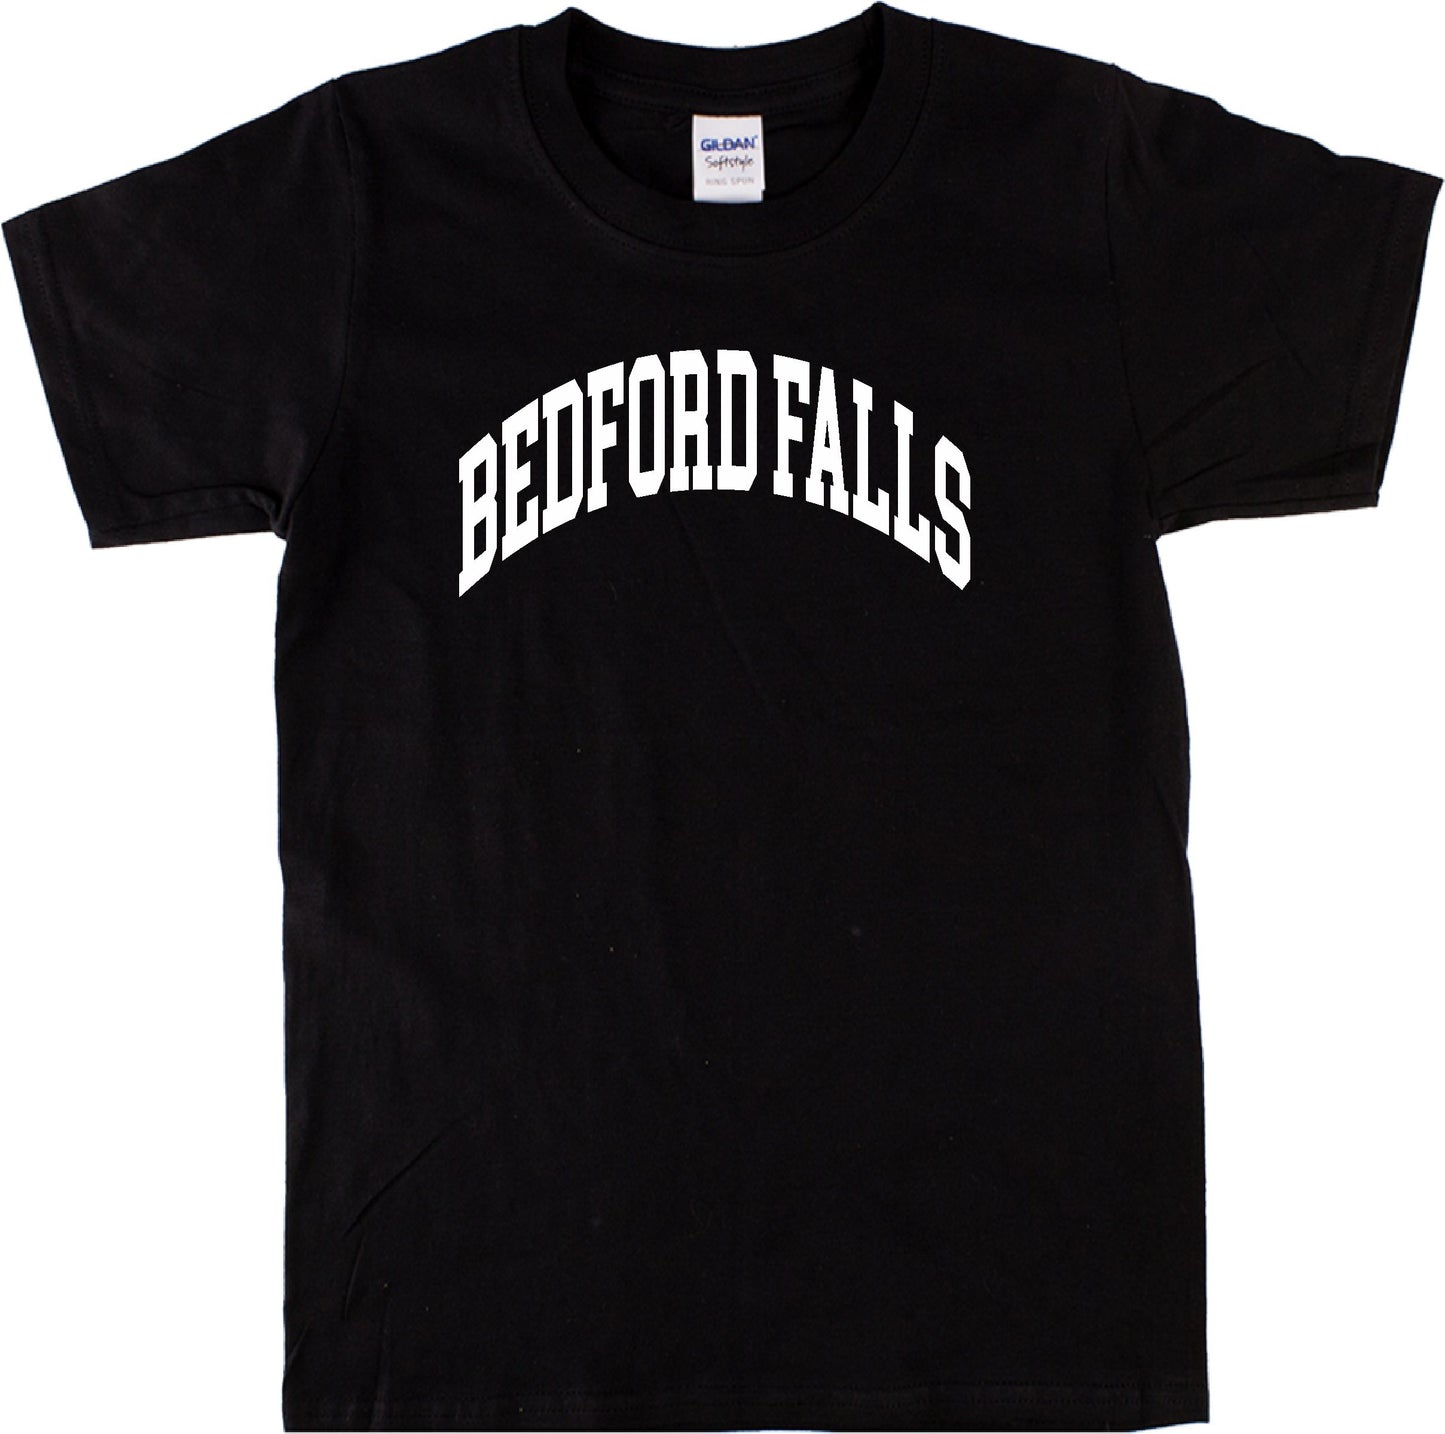 Bedford Falls T-Shirt - It's A Wonderful Life, Christmas Festive Gift, Various Colours